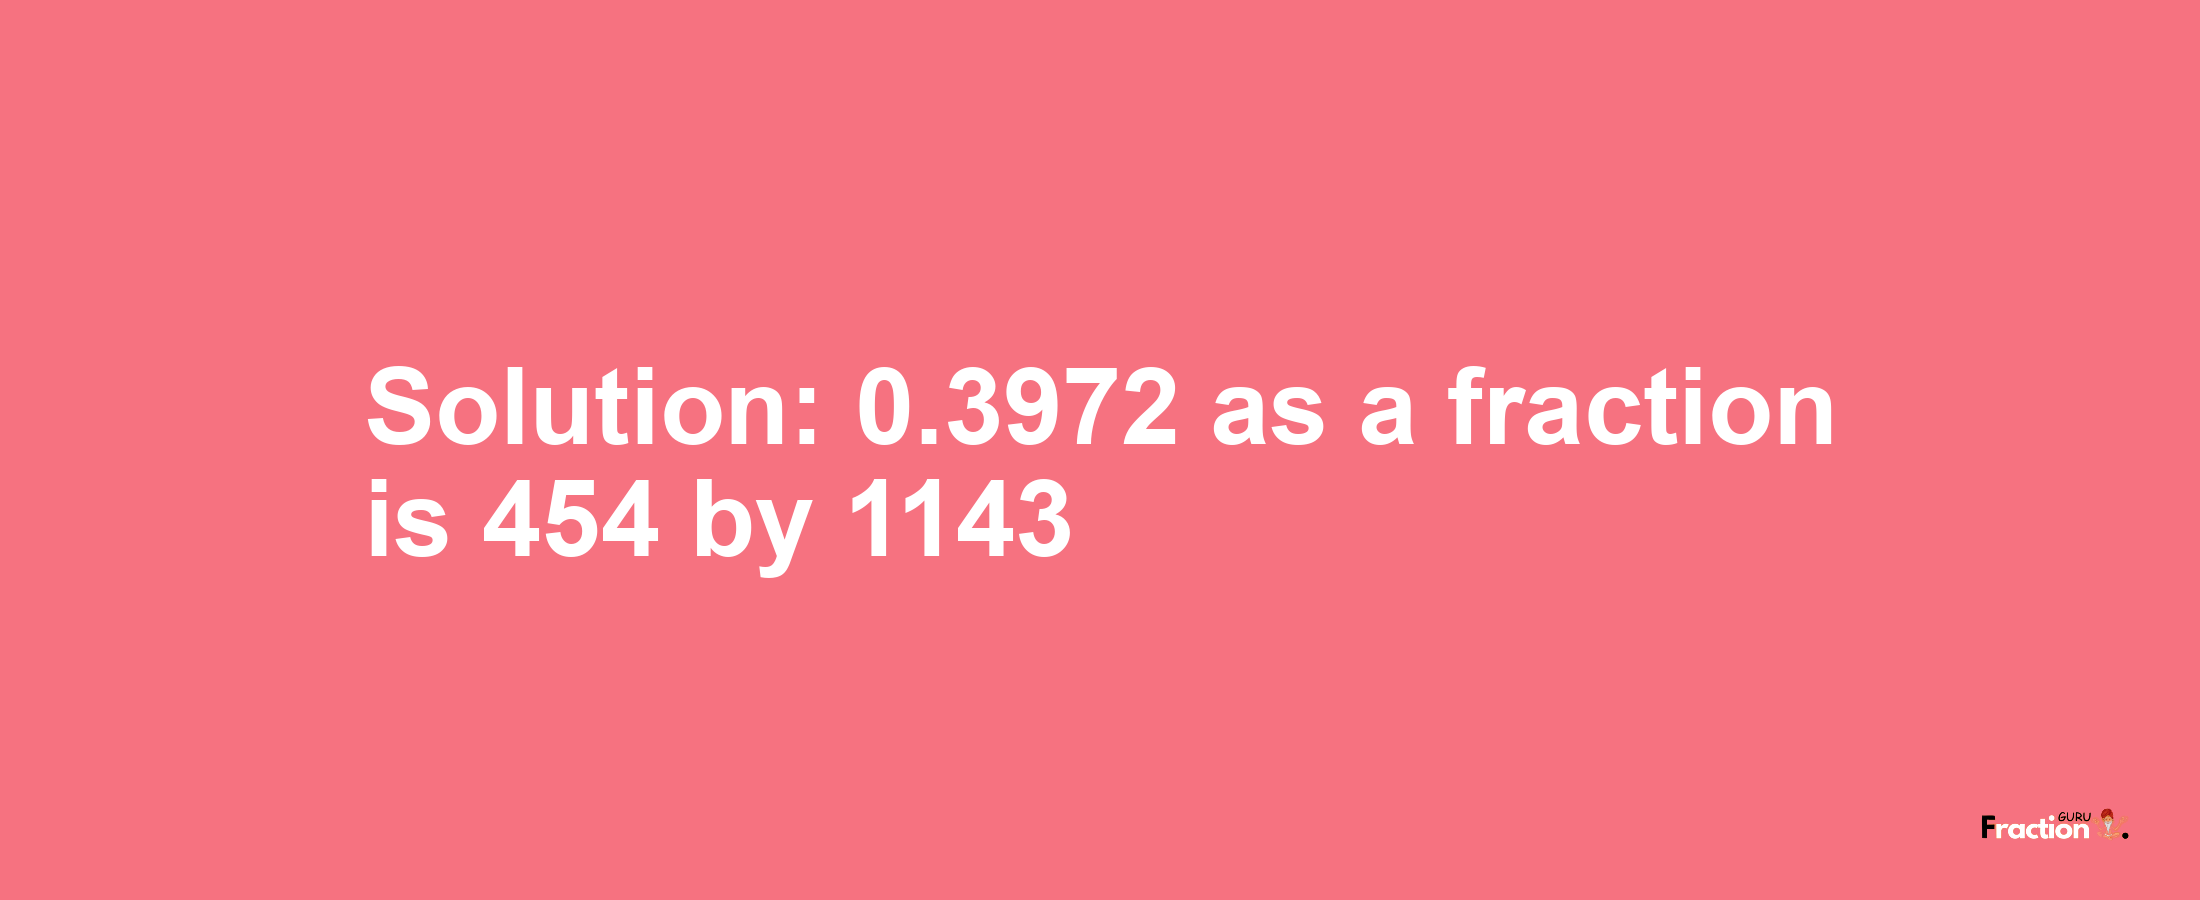 Solution:0.3972 as a fraction is 454/1143